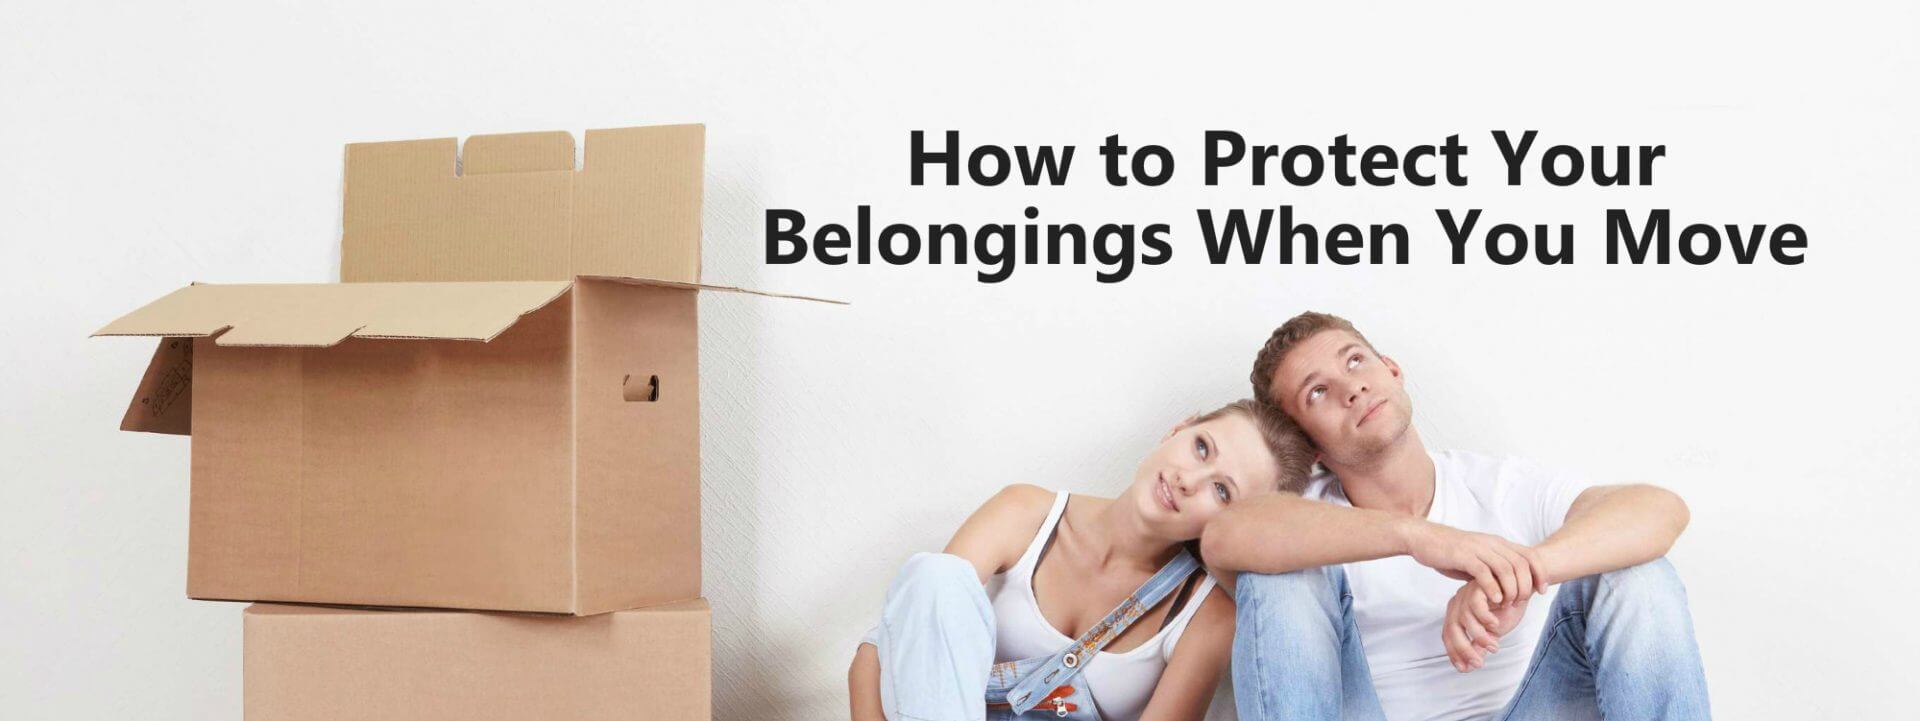 How to put a value on your belongings when you move